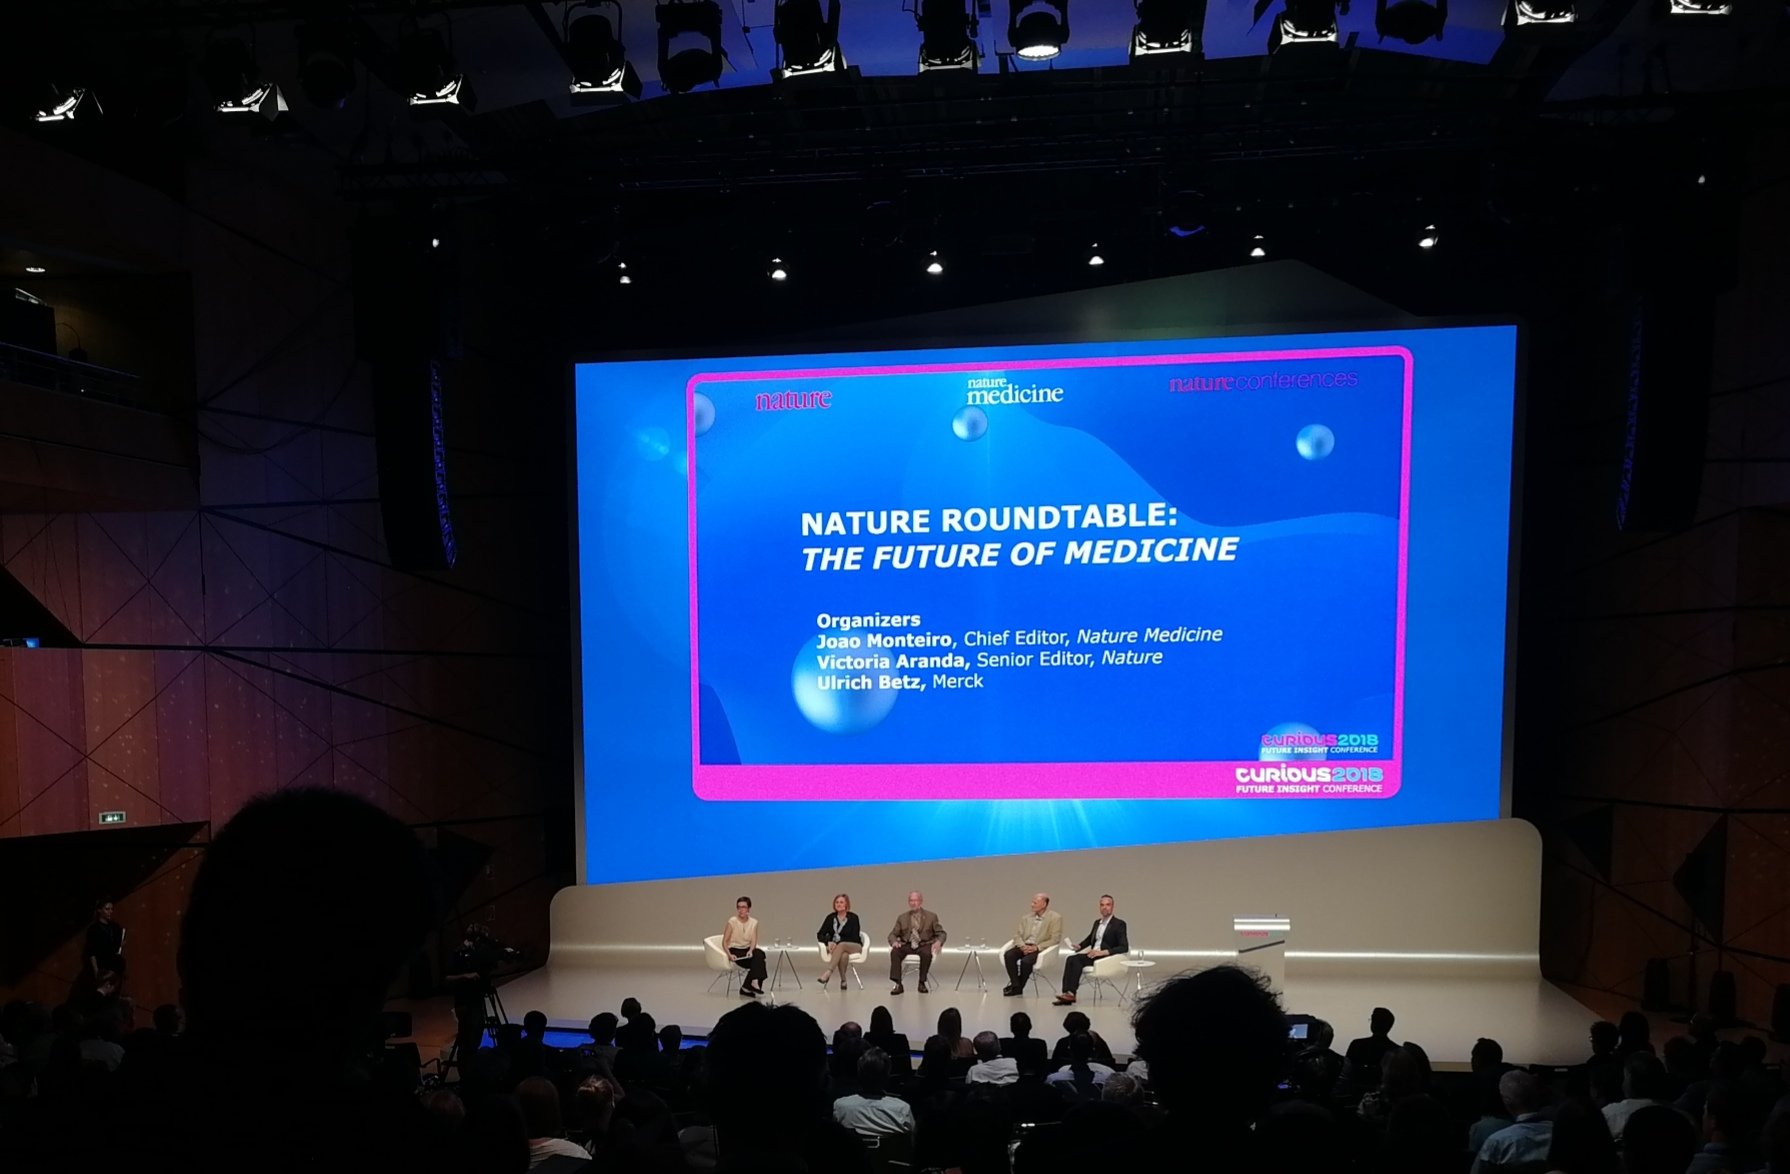 Fabian Hundemer on Twitter: "Exciting panel discussion organized by @nature and @merckgroup about the future of at #curious2018 future insight conference. https://t.co/8bIHY9q9wp" / Twitter